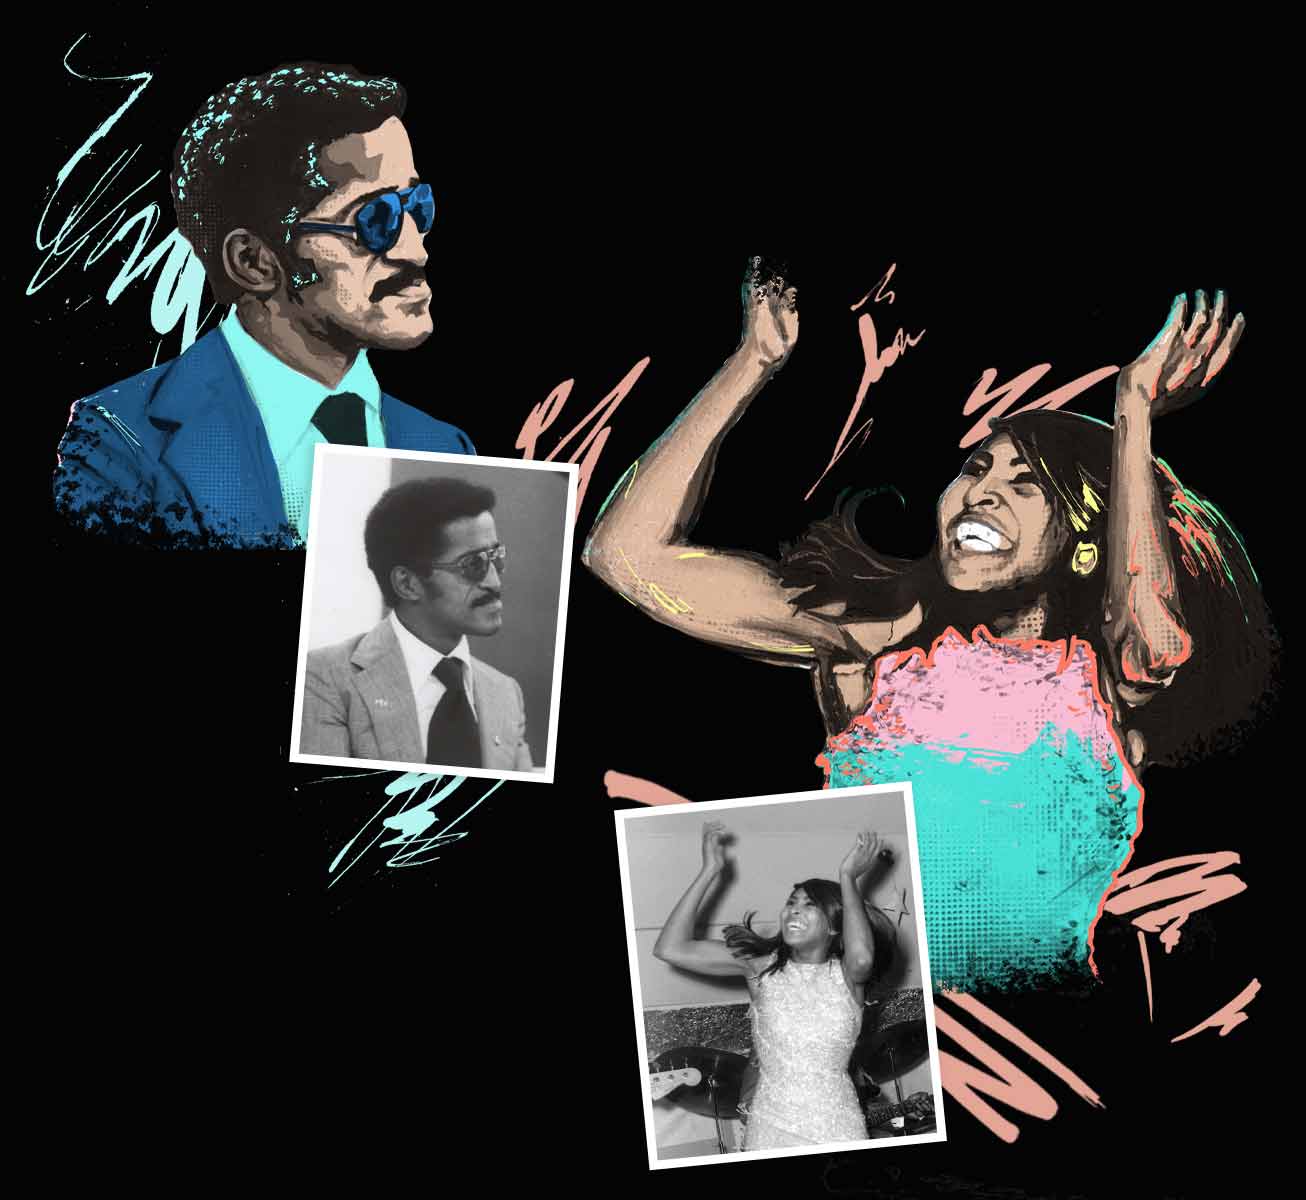 Side-by-side artistic illustrations of Sammy Davis Jr. and Tina Turner, with matching black-and-white photos.